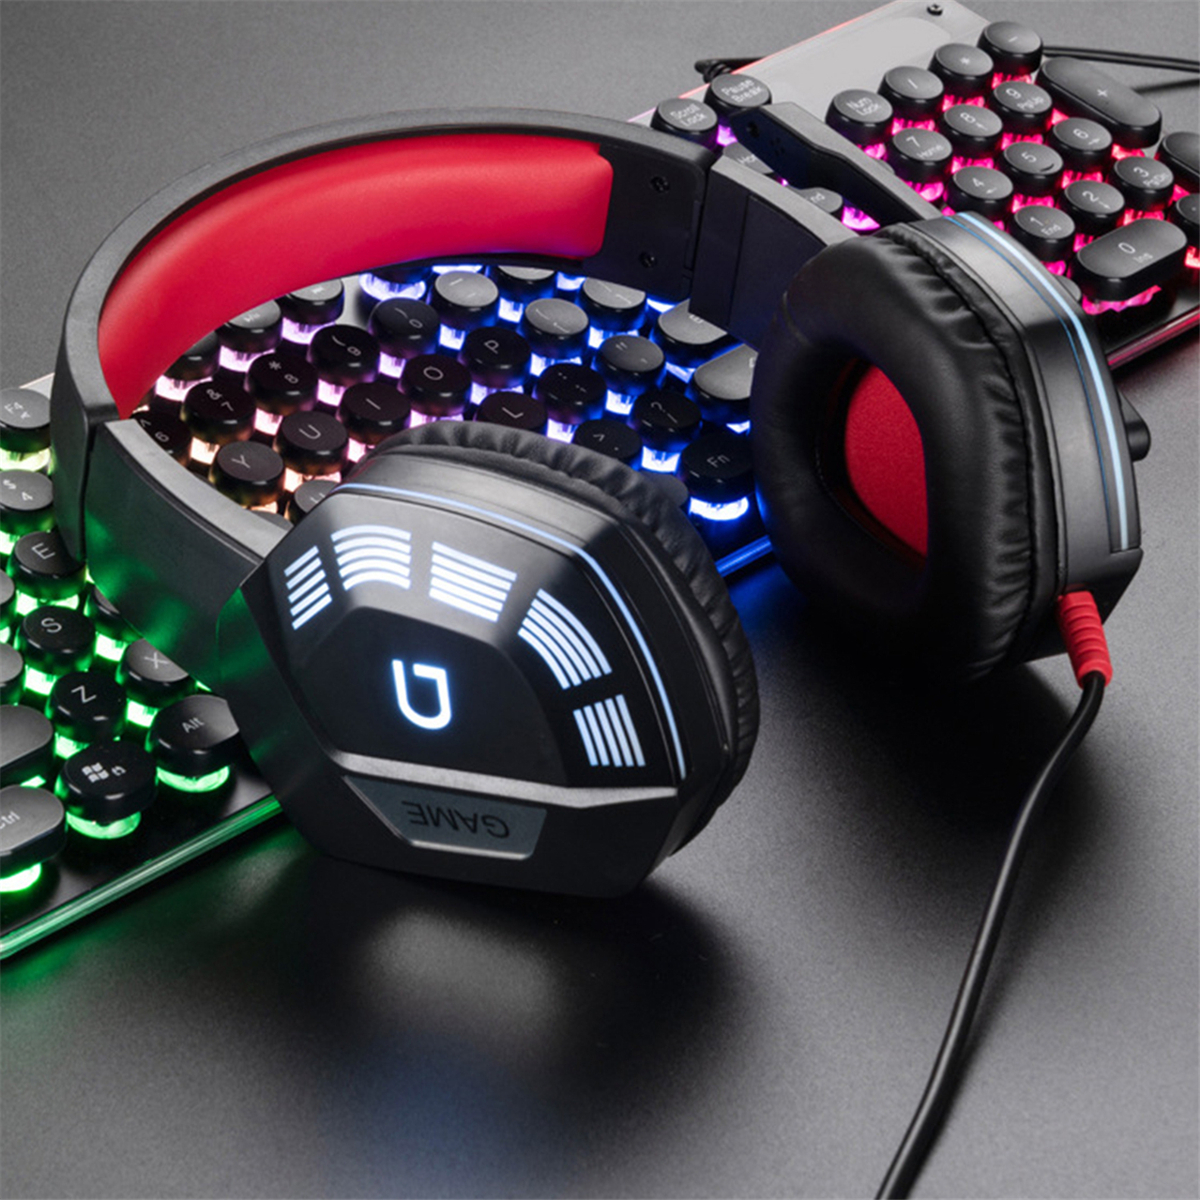 M1-Gaming-Headset-Surround-Sound-Music-Earphones-USB-71--35mm-Wired-RGB-Backlight-Game-Headphones-wi-1827492-22